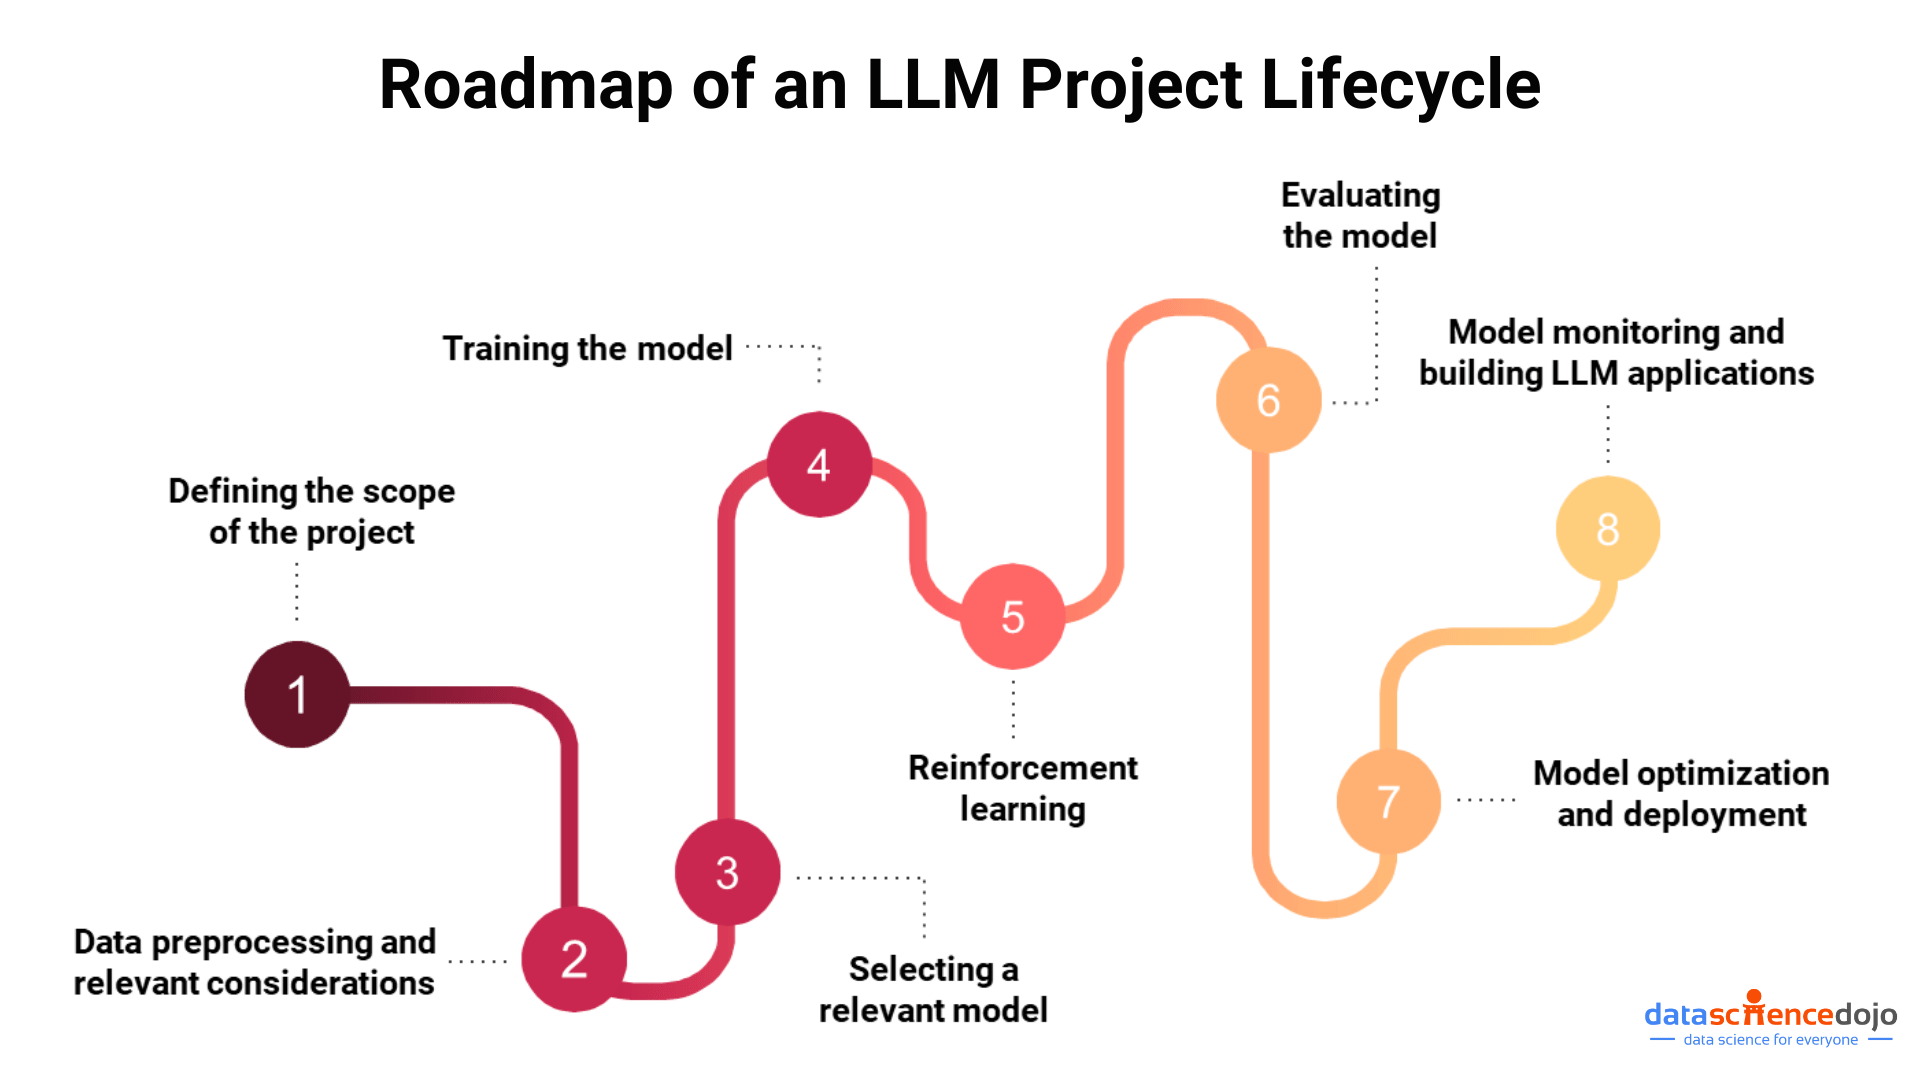 A roadmap of an LLM project lifecycle